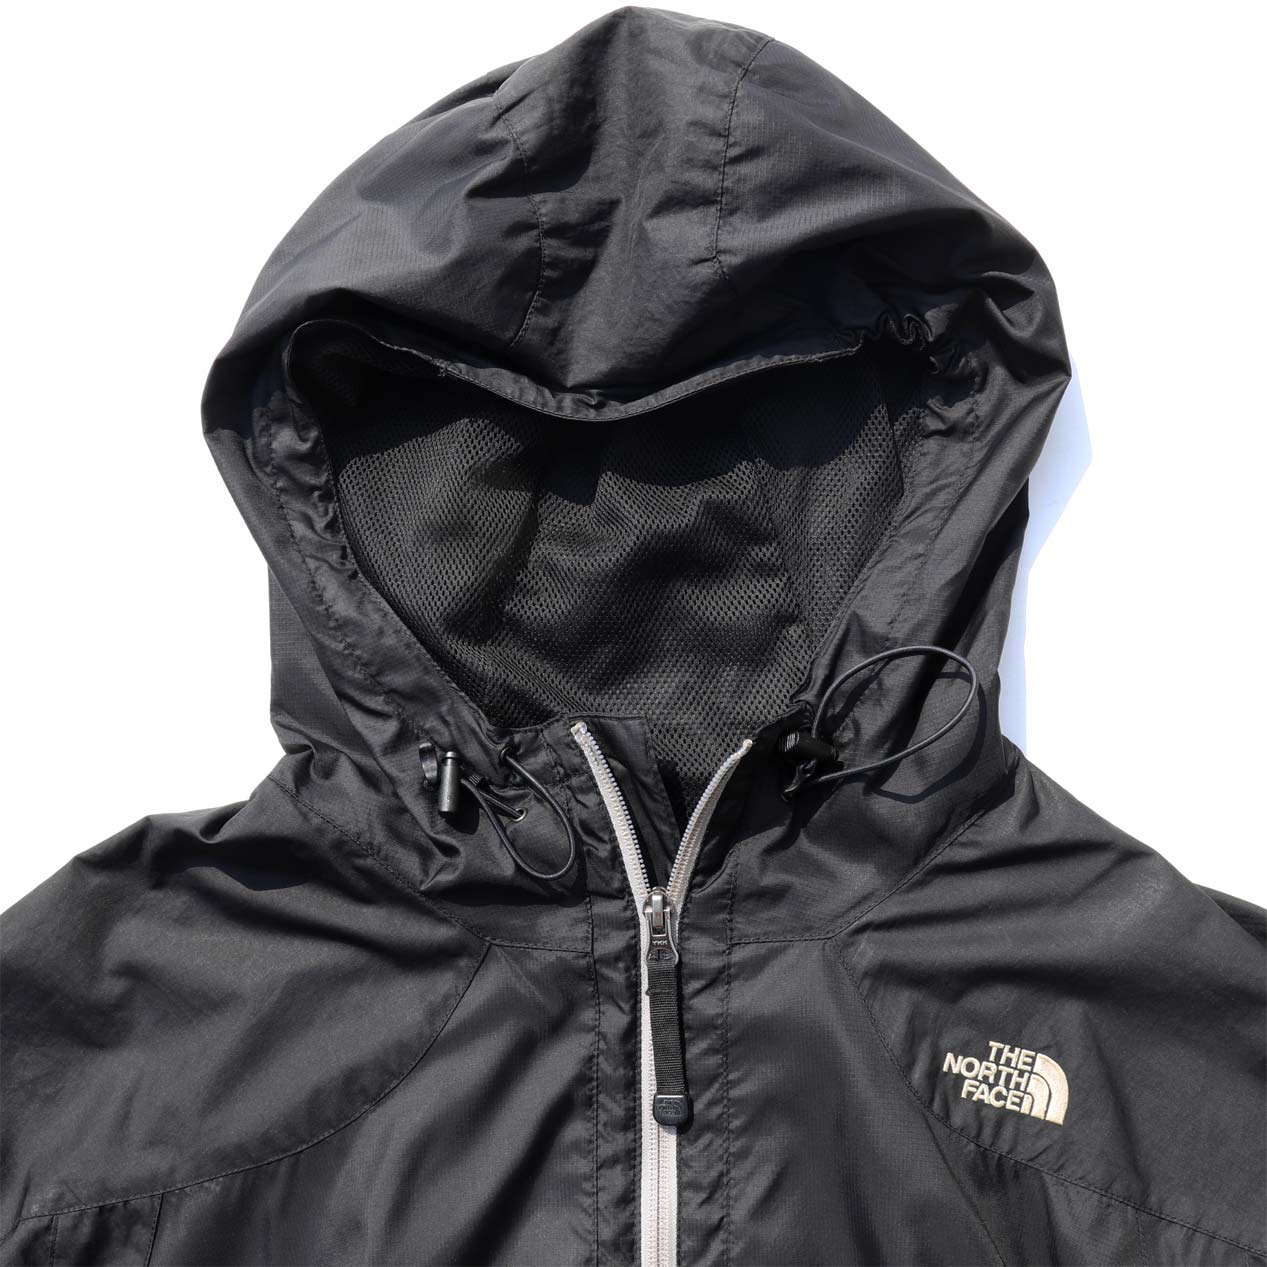 POST JUNK / 00's～ THE NORTH FACE ”STEEP TECH” ブラック ナイロン 